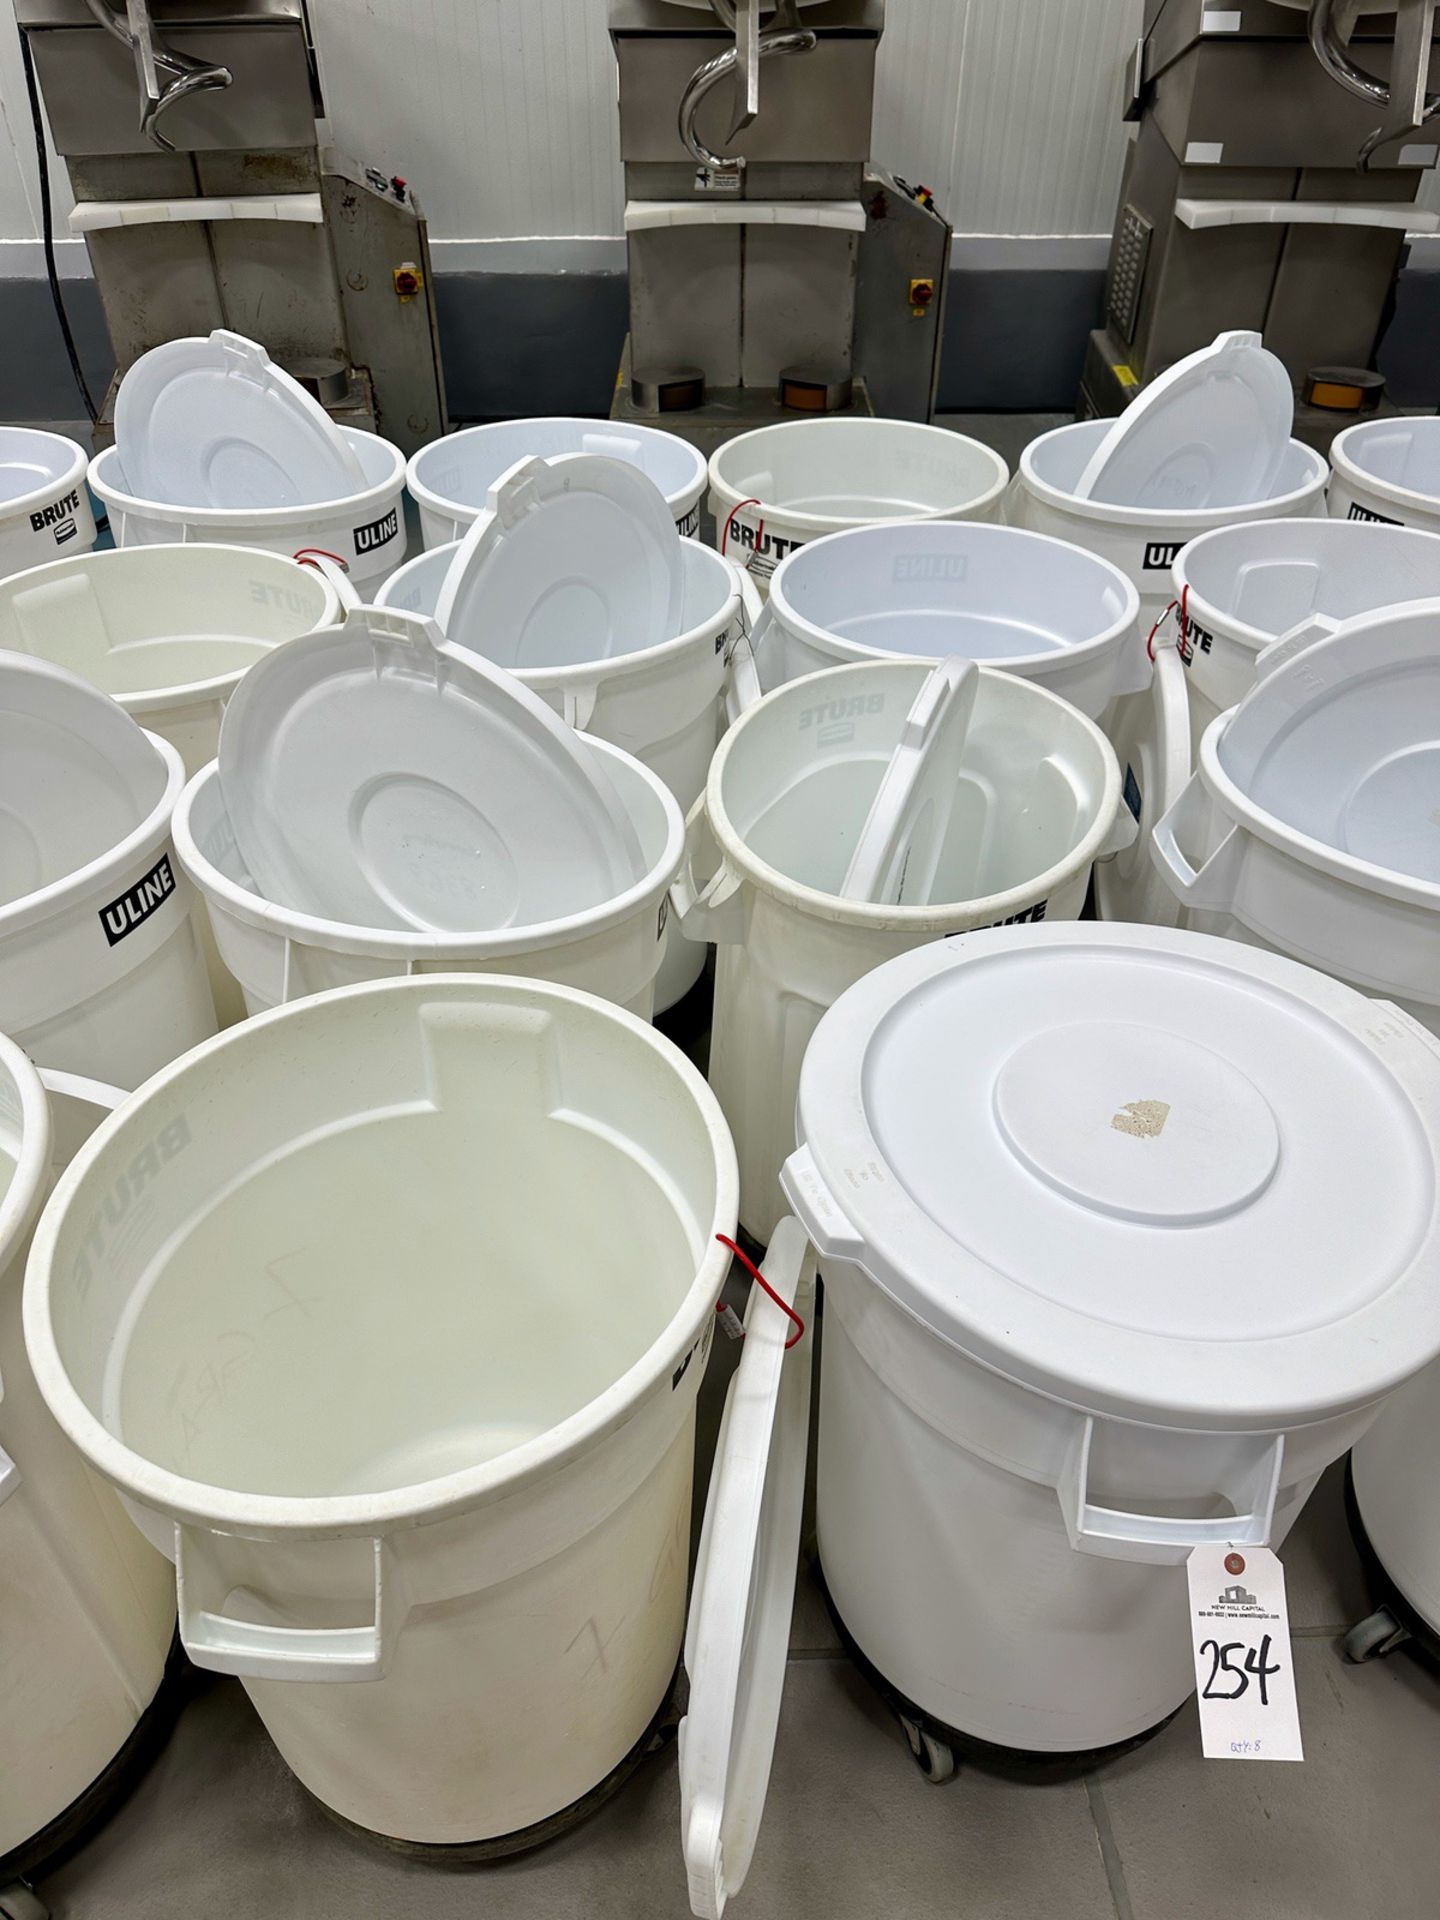 Lot of (8) 55 Gallon Drums on Dollies | Rig Fee $50